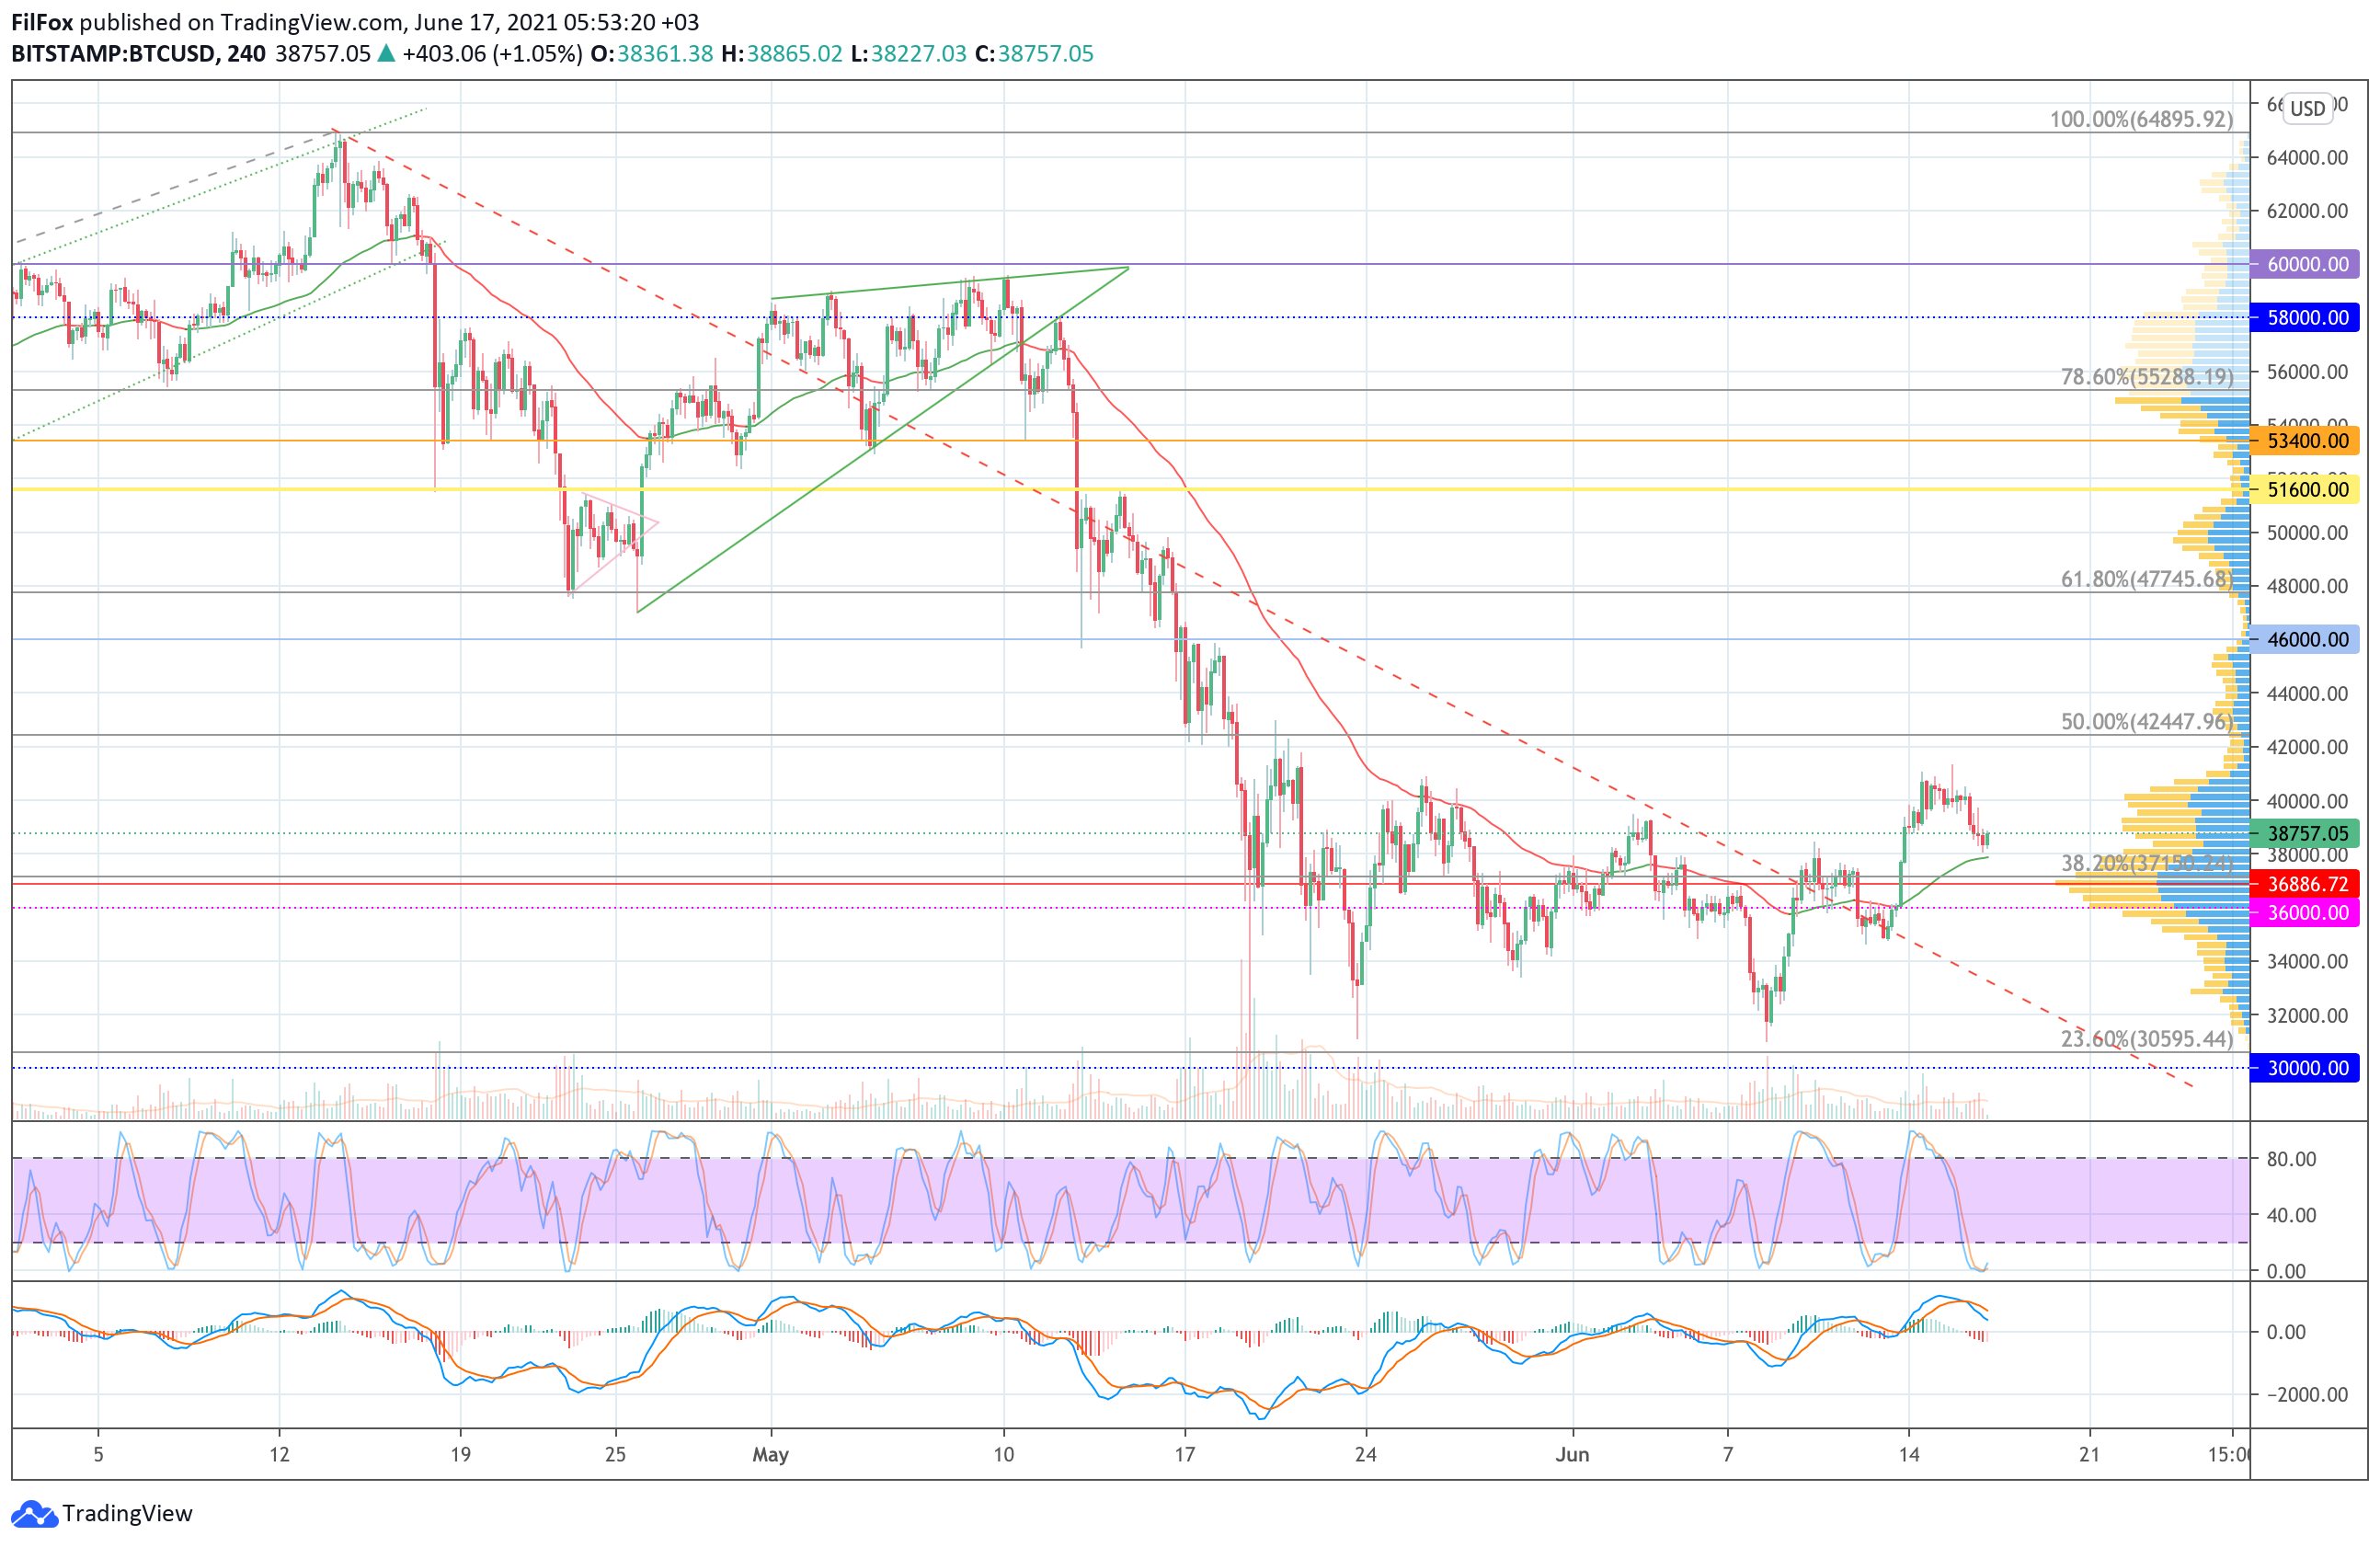 Analysis of the prices of Bitcoin, Ethereum, XRP for 06/17/2021